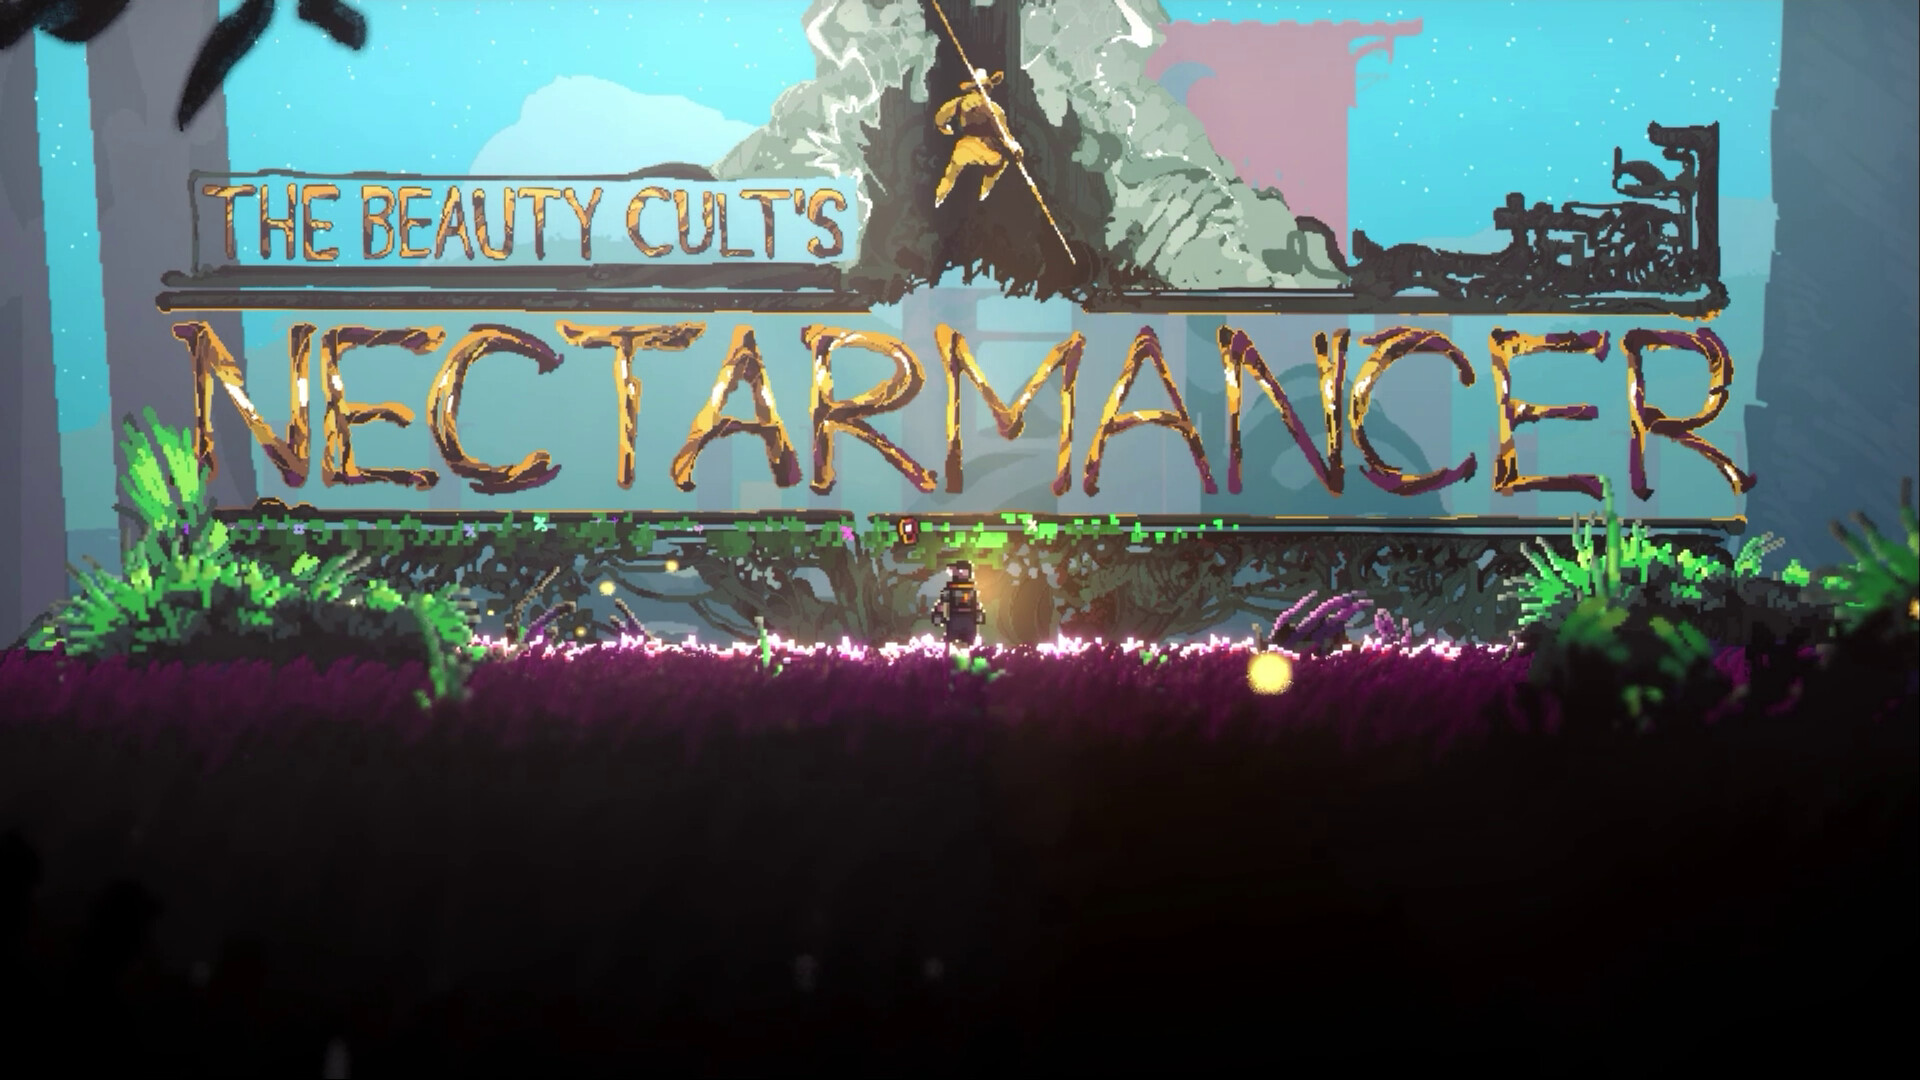 Gardening simulator and combat platformer The Beauty Cult’s Nectarmancer is announced